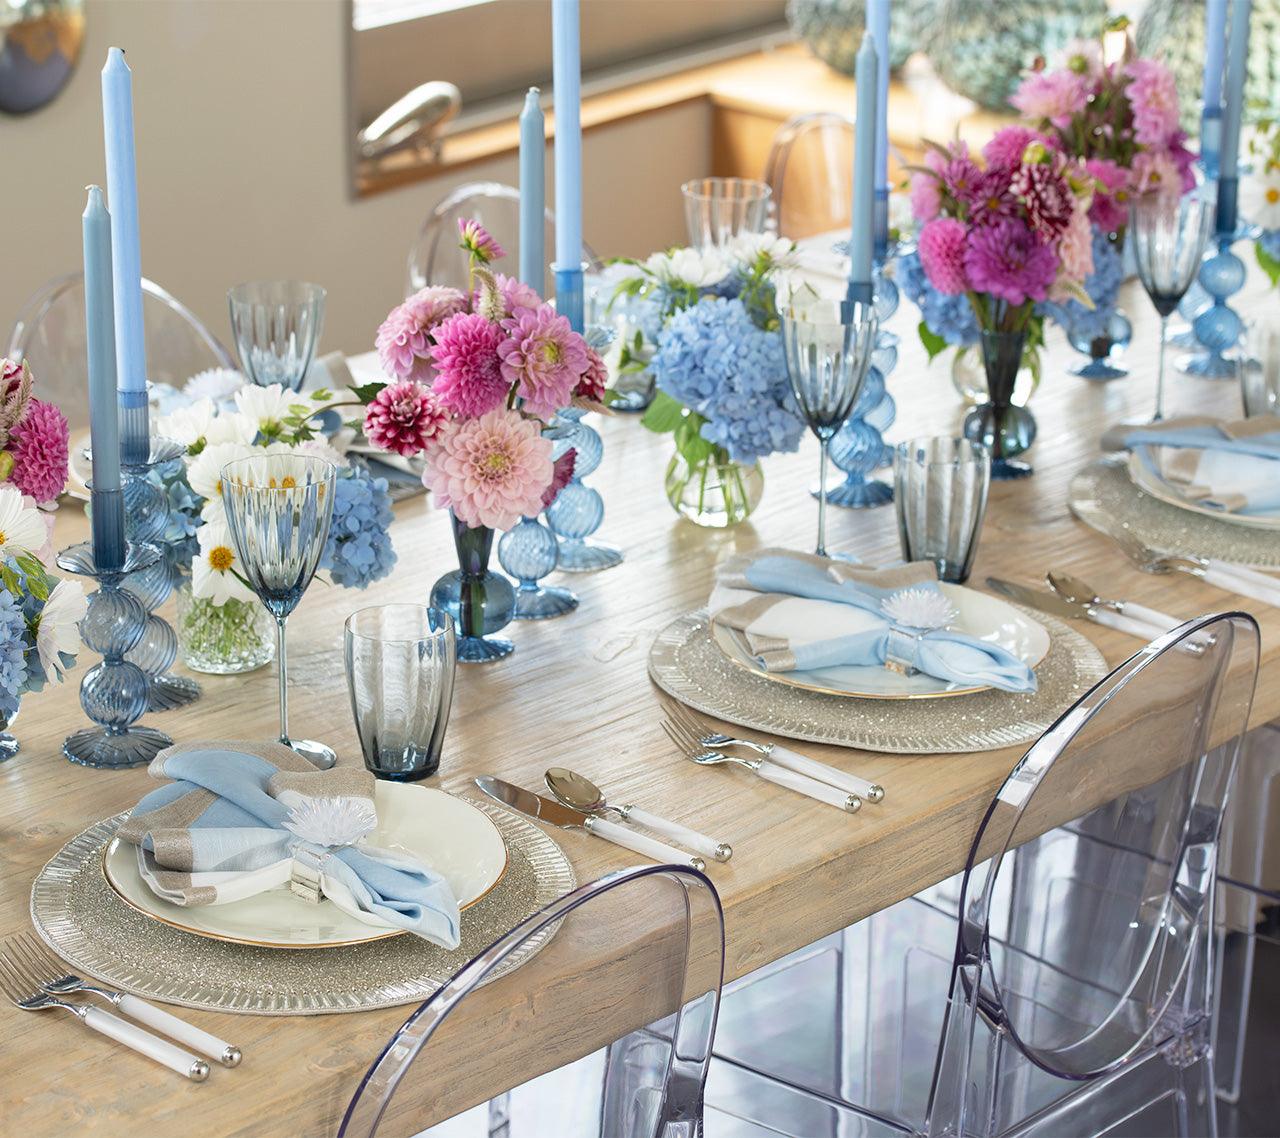 Table set with cadet blue Iris Tall Candle Holders and blue vases